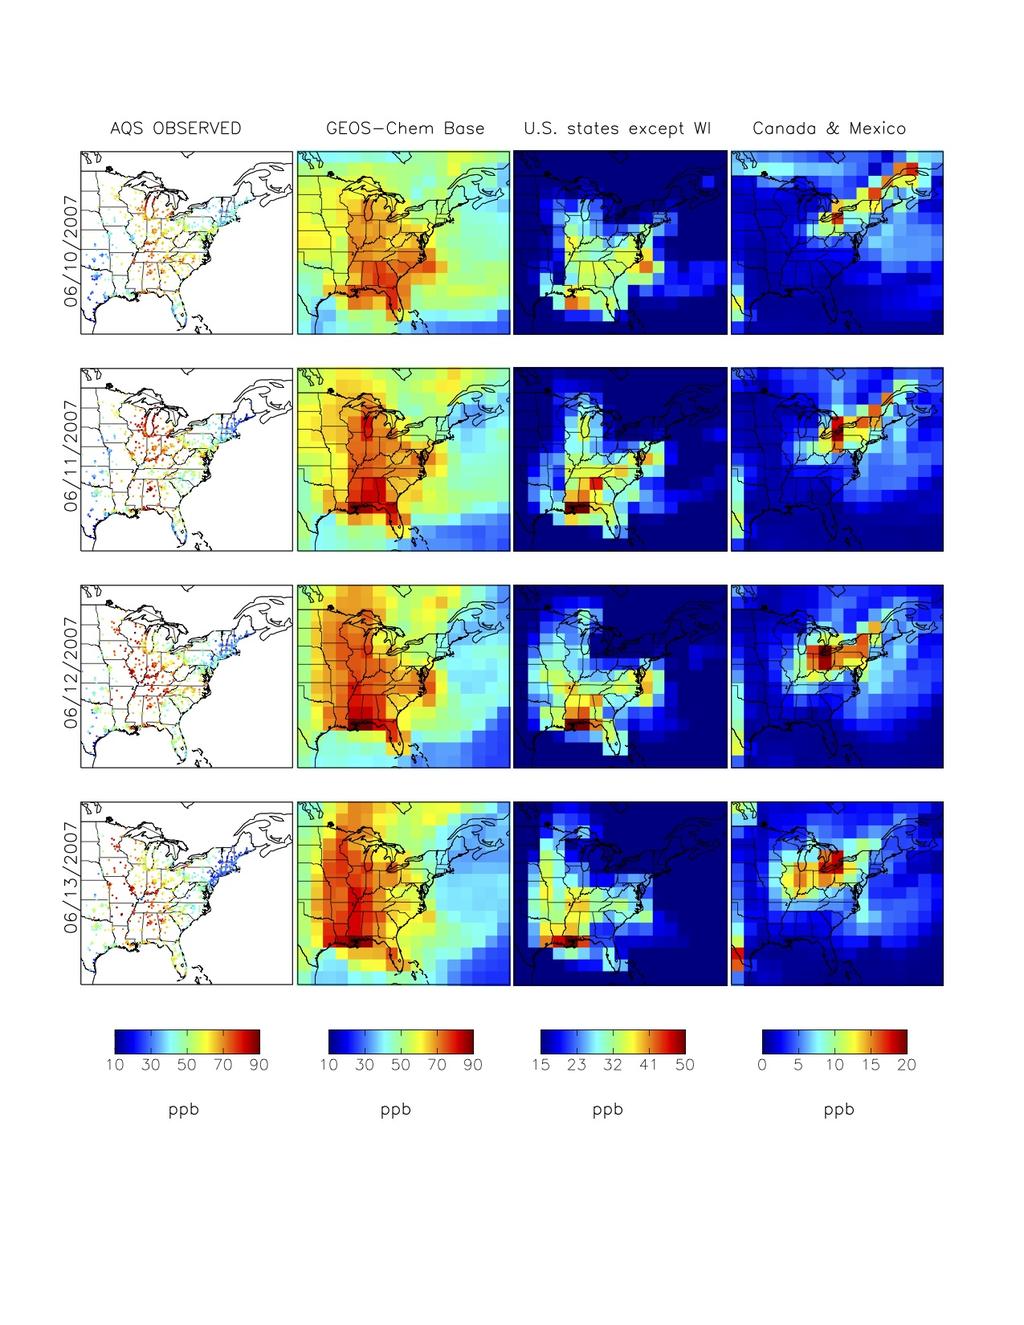 Figure 30: Source attribution for WI 2007 high-ozone event using GEOS-Chem simulations. This plot continues from page 19 to page 21. The anthropogenic contribution from all U.S. states except WI (third column from left) was calculated by subtracting US background from the No-WI contribution.